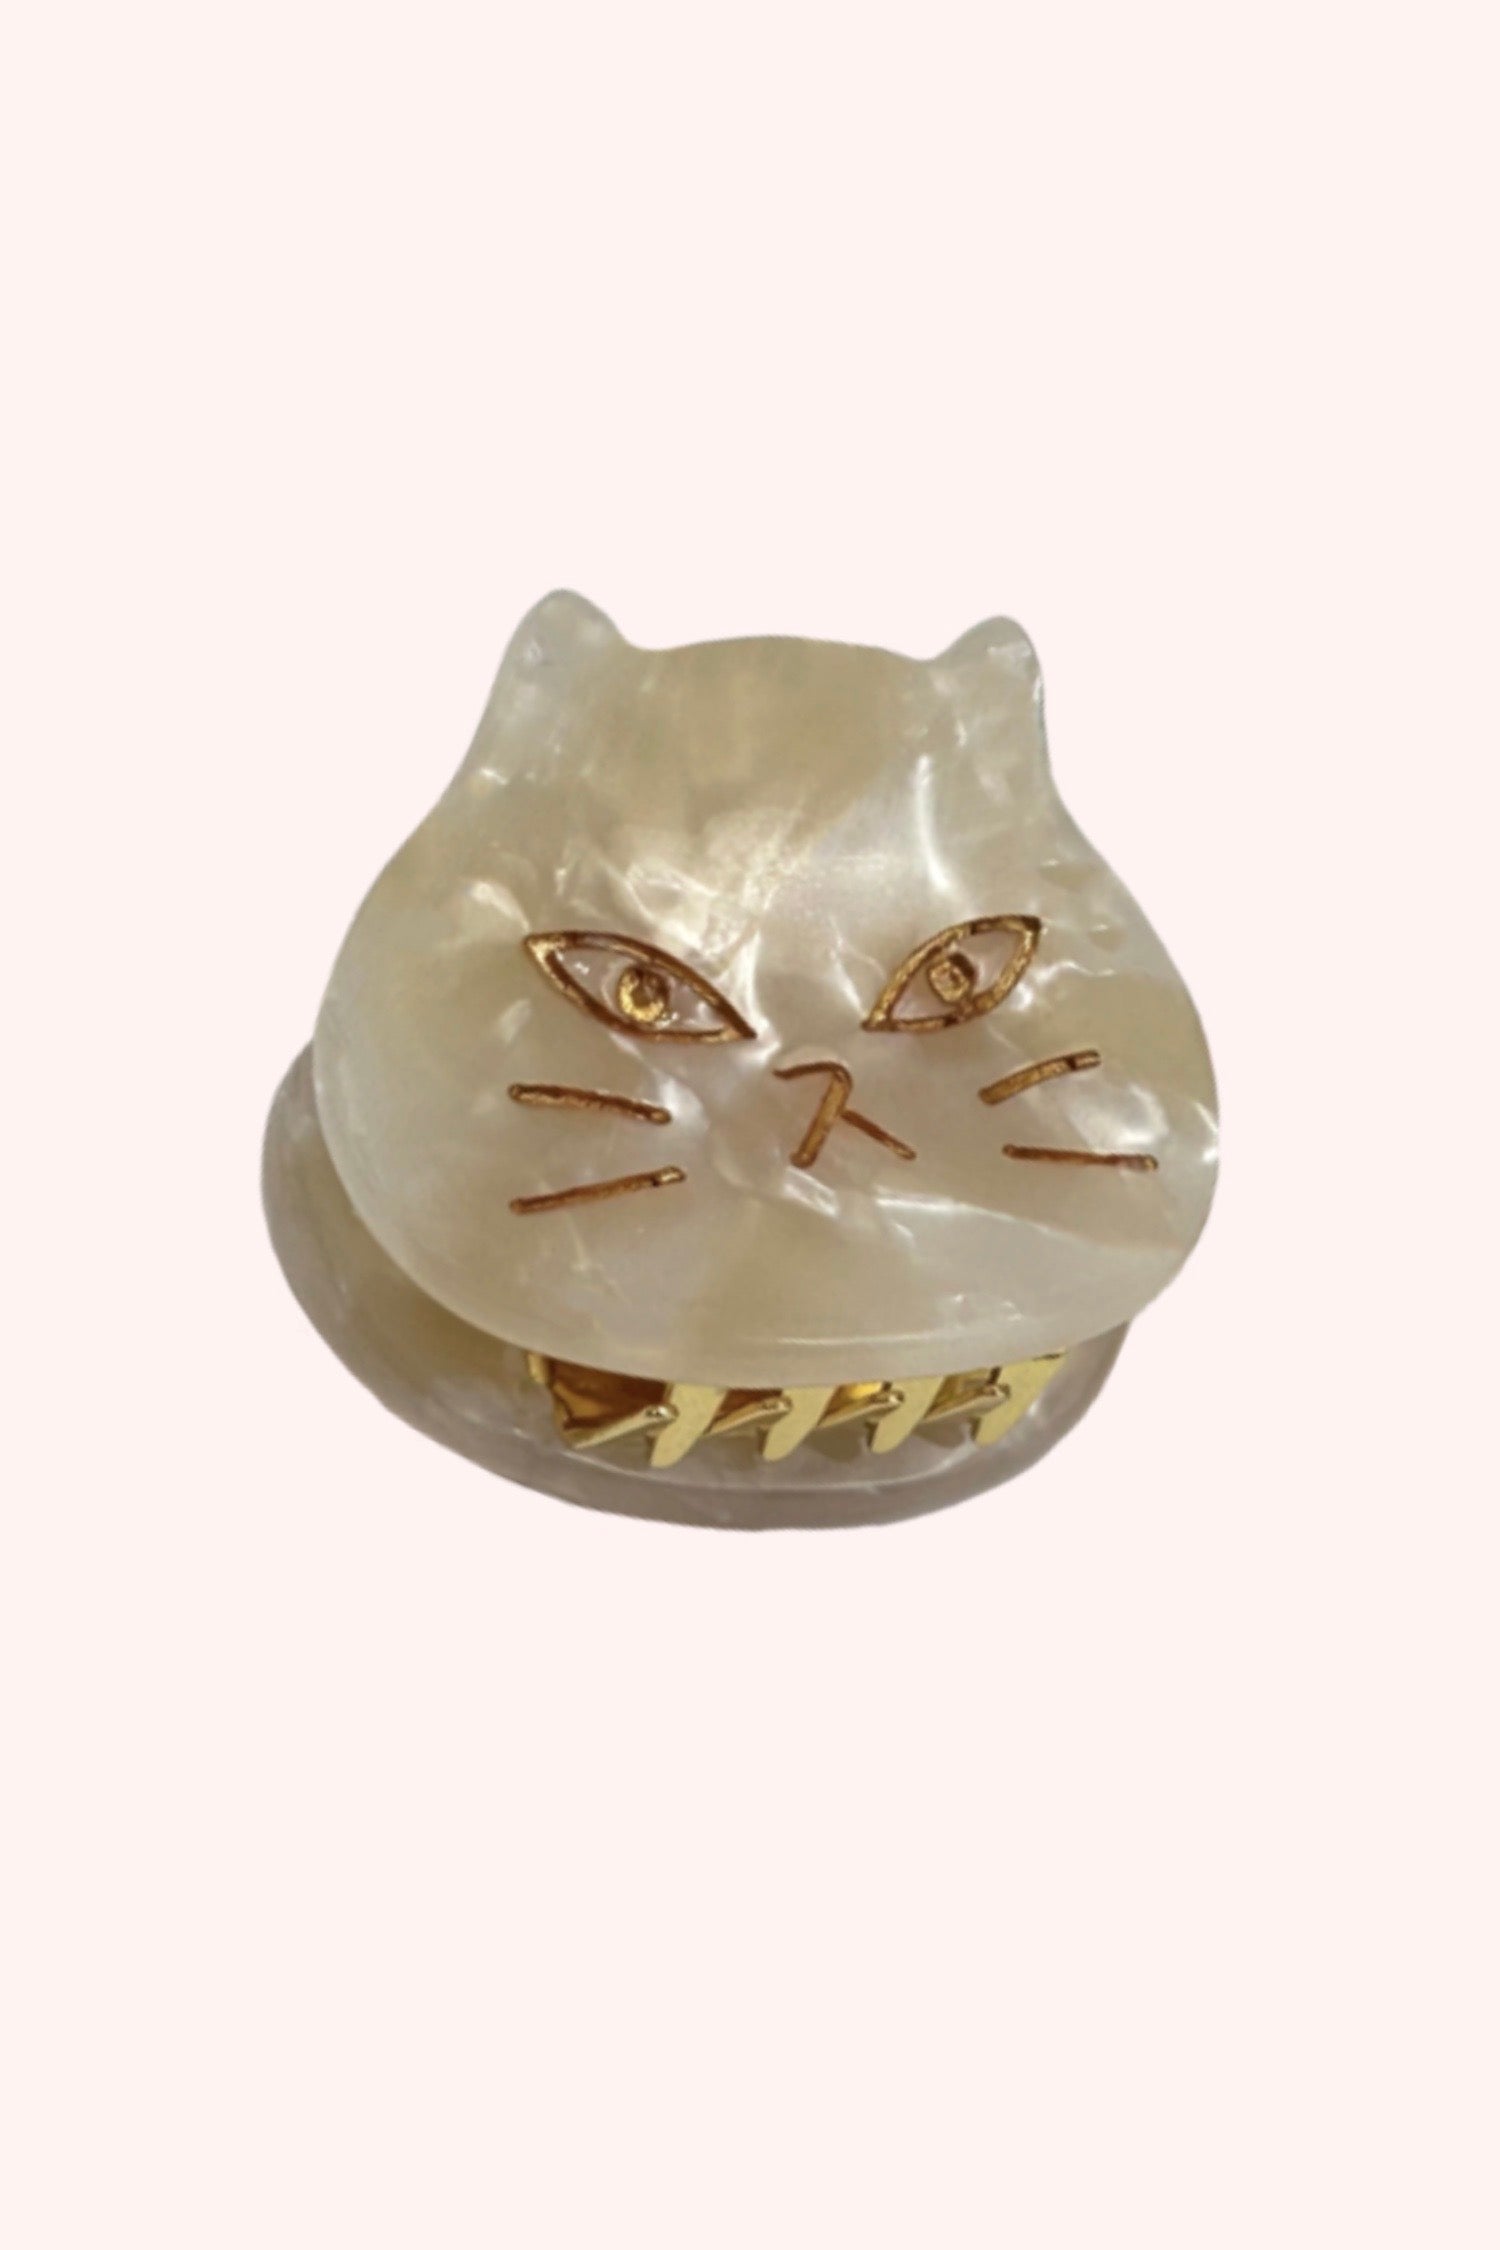 The Cat's Meow Jaw Clip Pair, ivory, cat eyes, mouth, nose, whiskers are with golden highlight